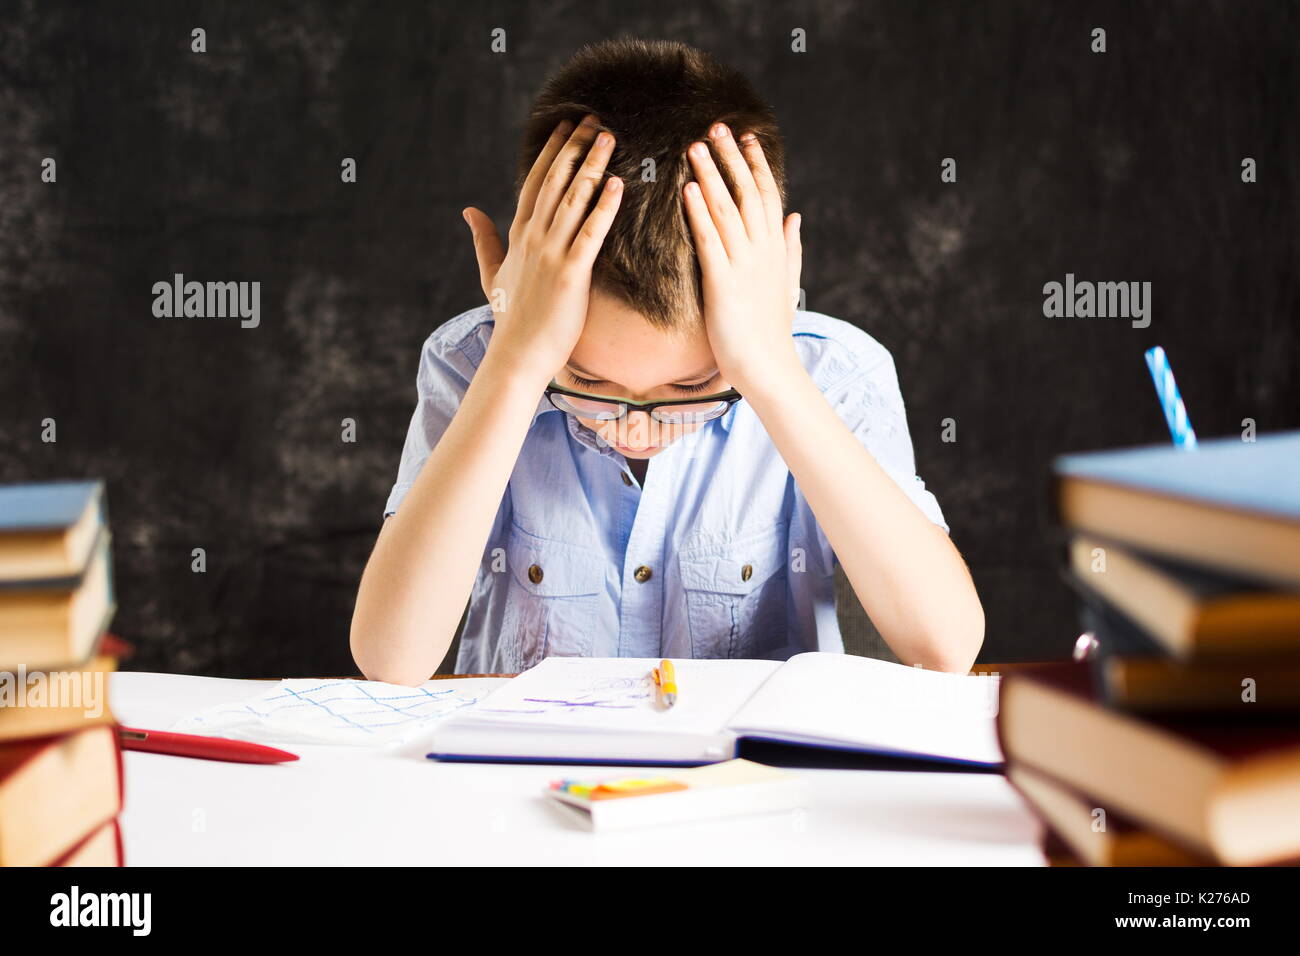 Boy having problems in finishing homework at home Stock Photo